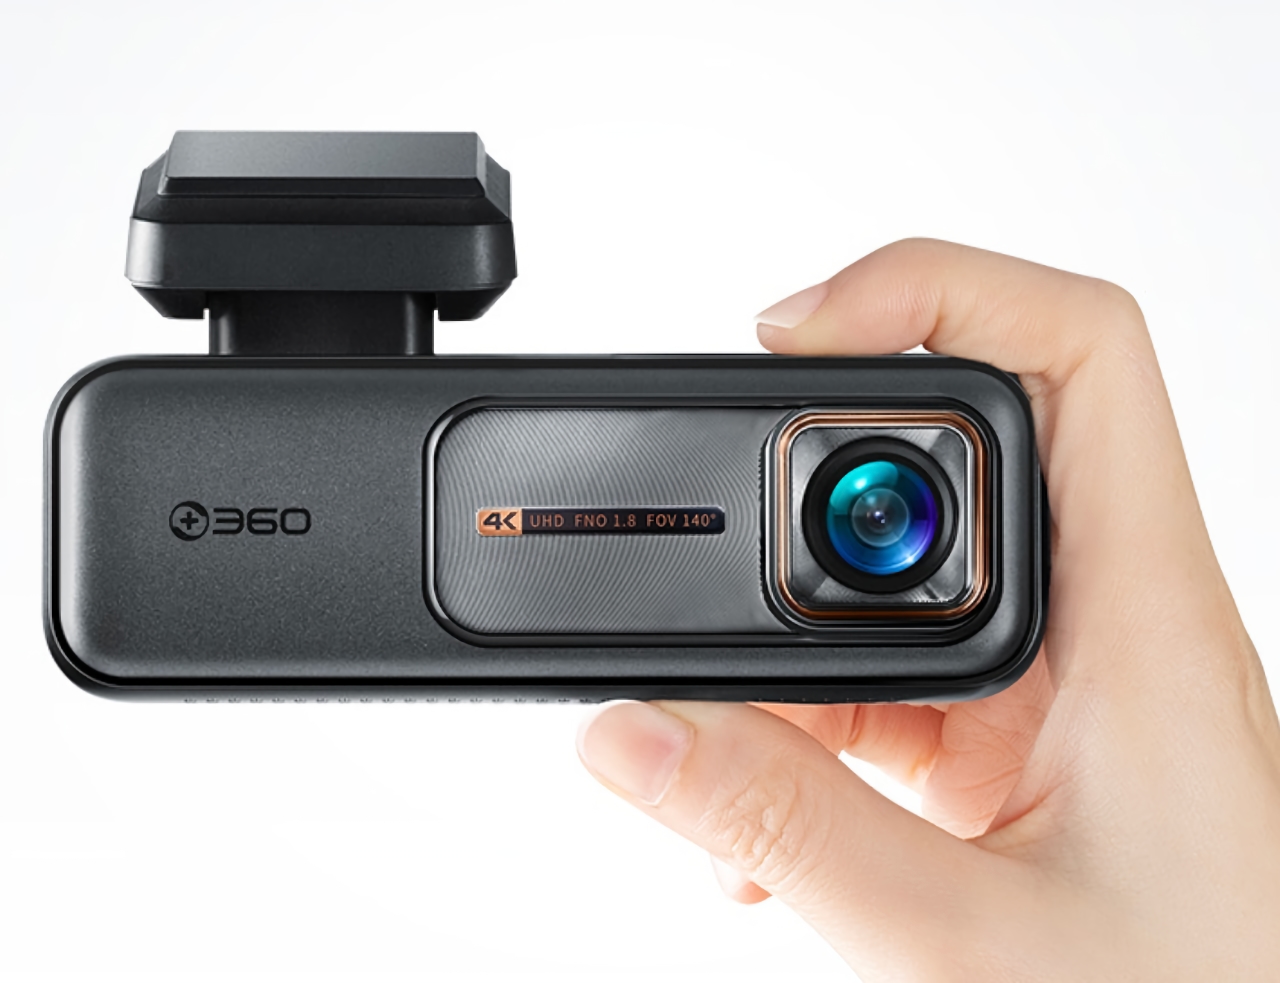 Instagram: Introducing C8 APEX dash camera - the ultimate solution for  clear capturing of license plates and road signs. With true 4K UHD  resolution, Sony IMX 415 Sensor, and 7 glass lens